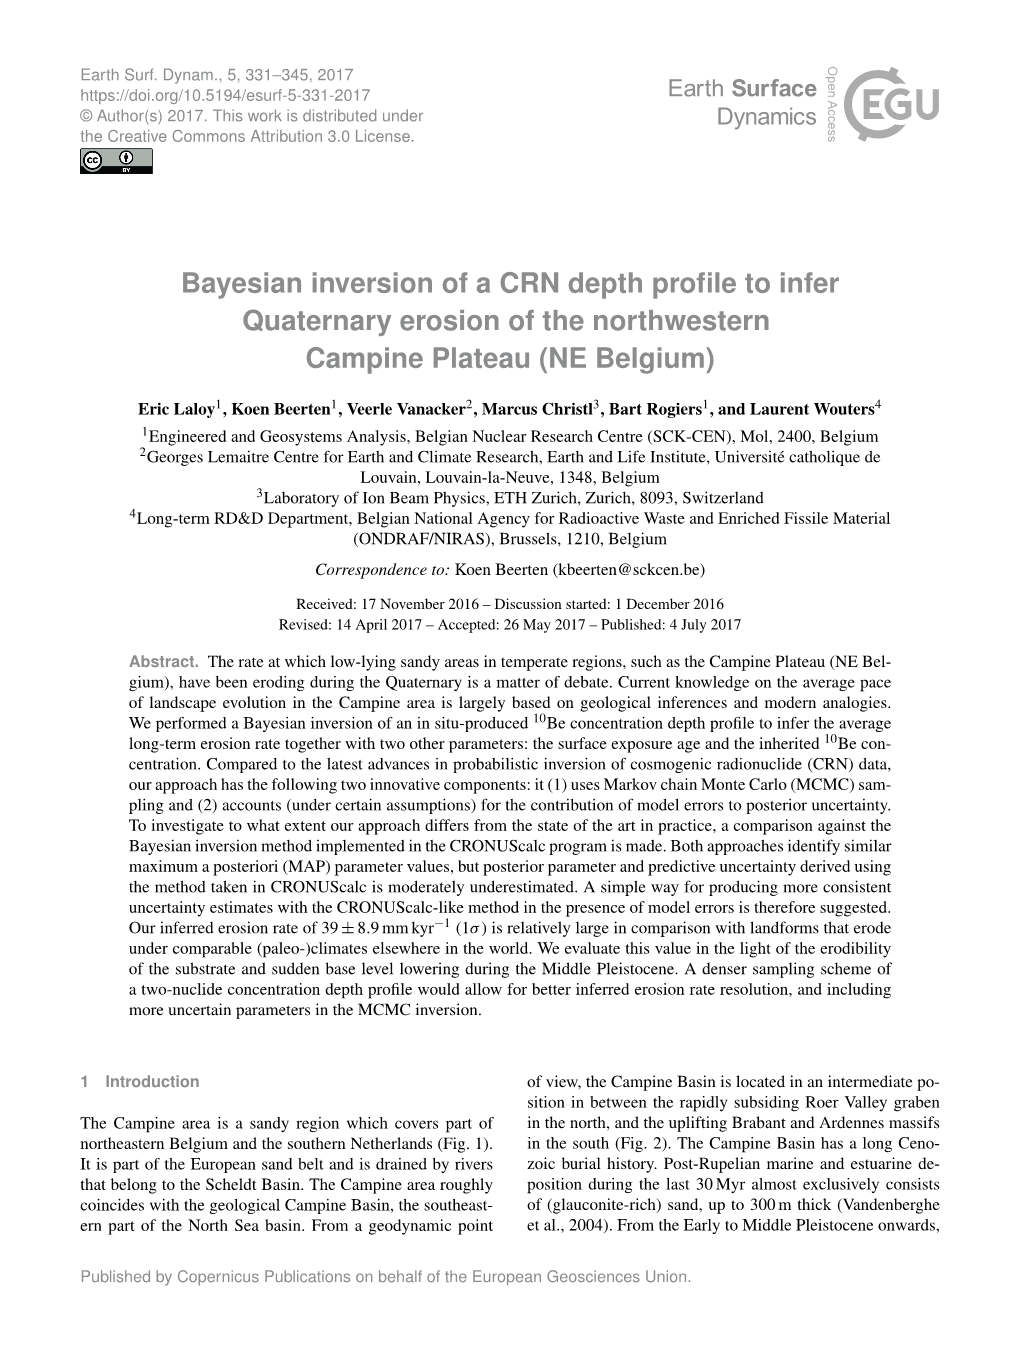 Bayesian Inversion of a CRN Depth Profile to Infer Quaternary Erosion Of